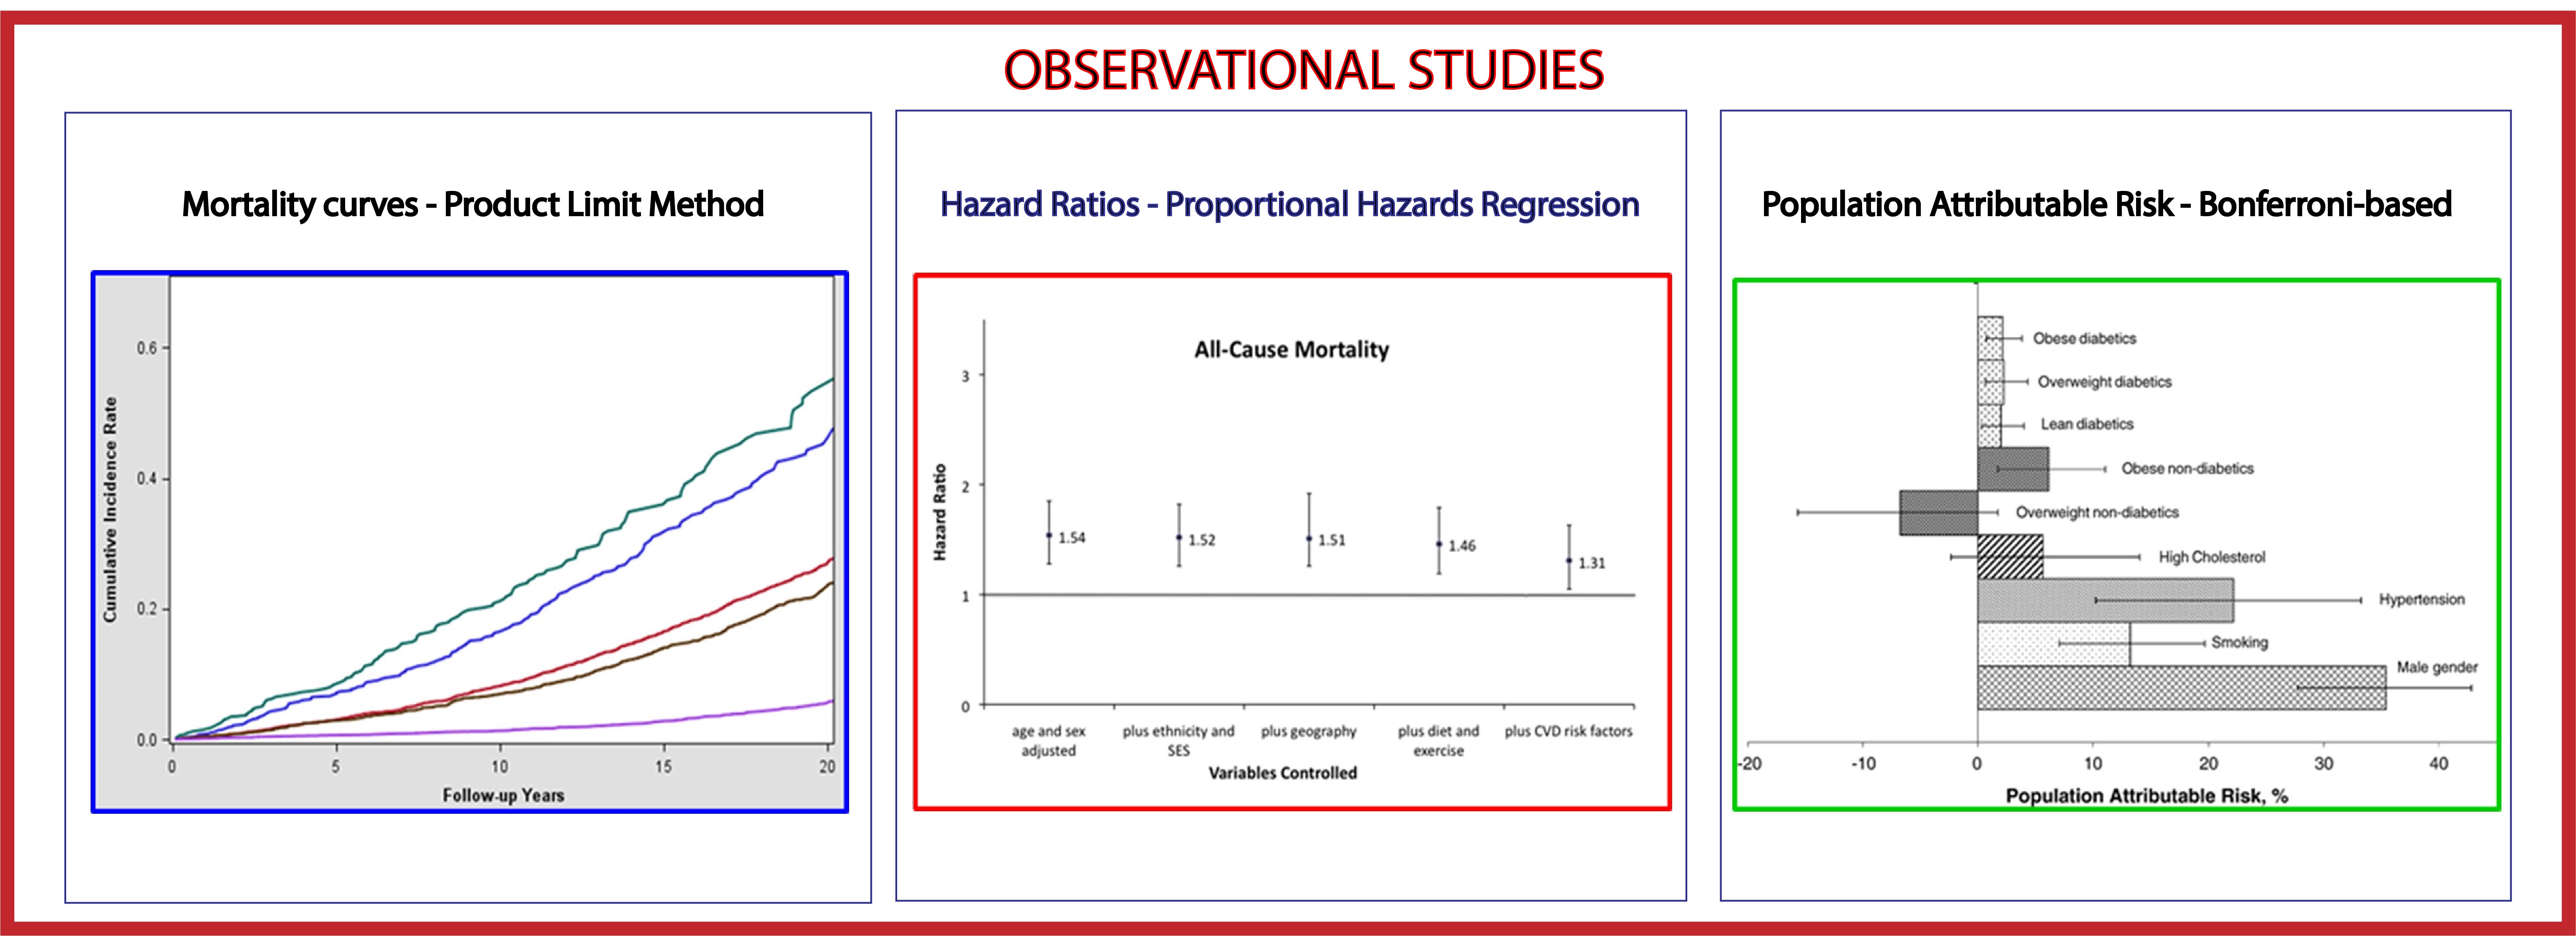 Panel of Three Graphs Showing Cardiovascular Risk Data from Observational Studies